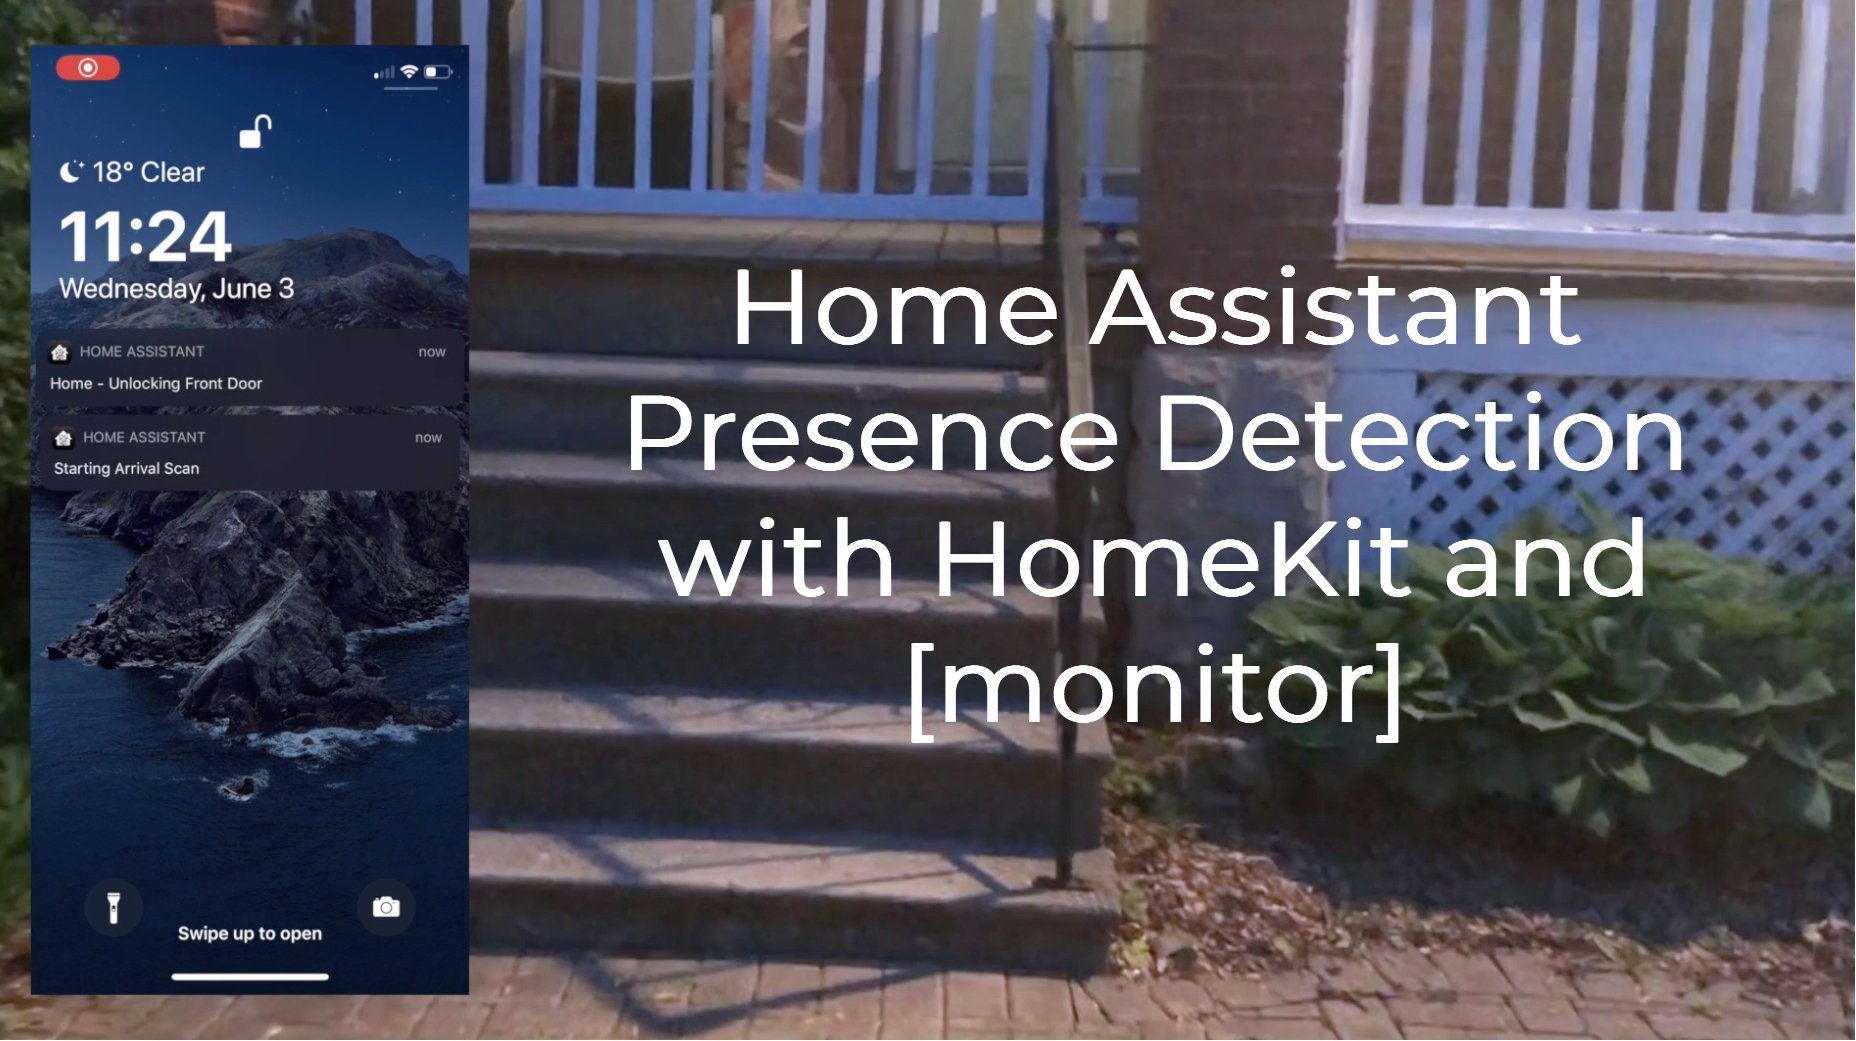 How to easily monitor Home Assistant